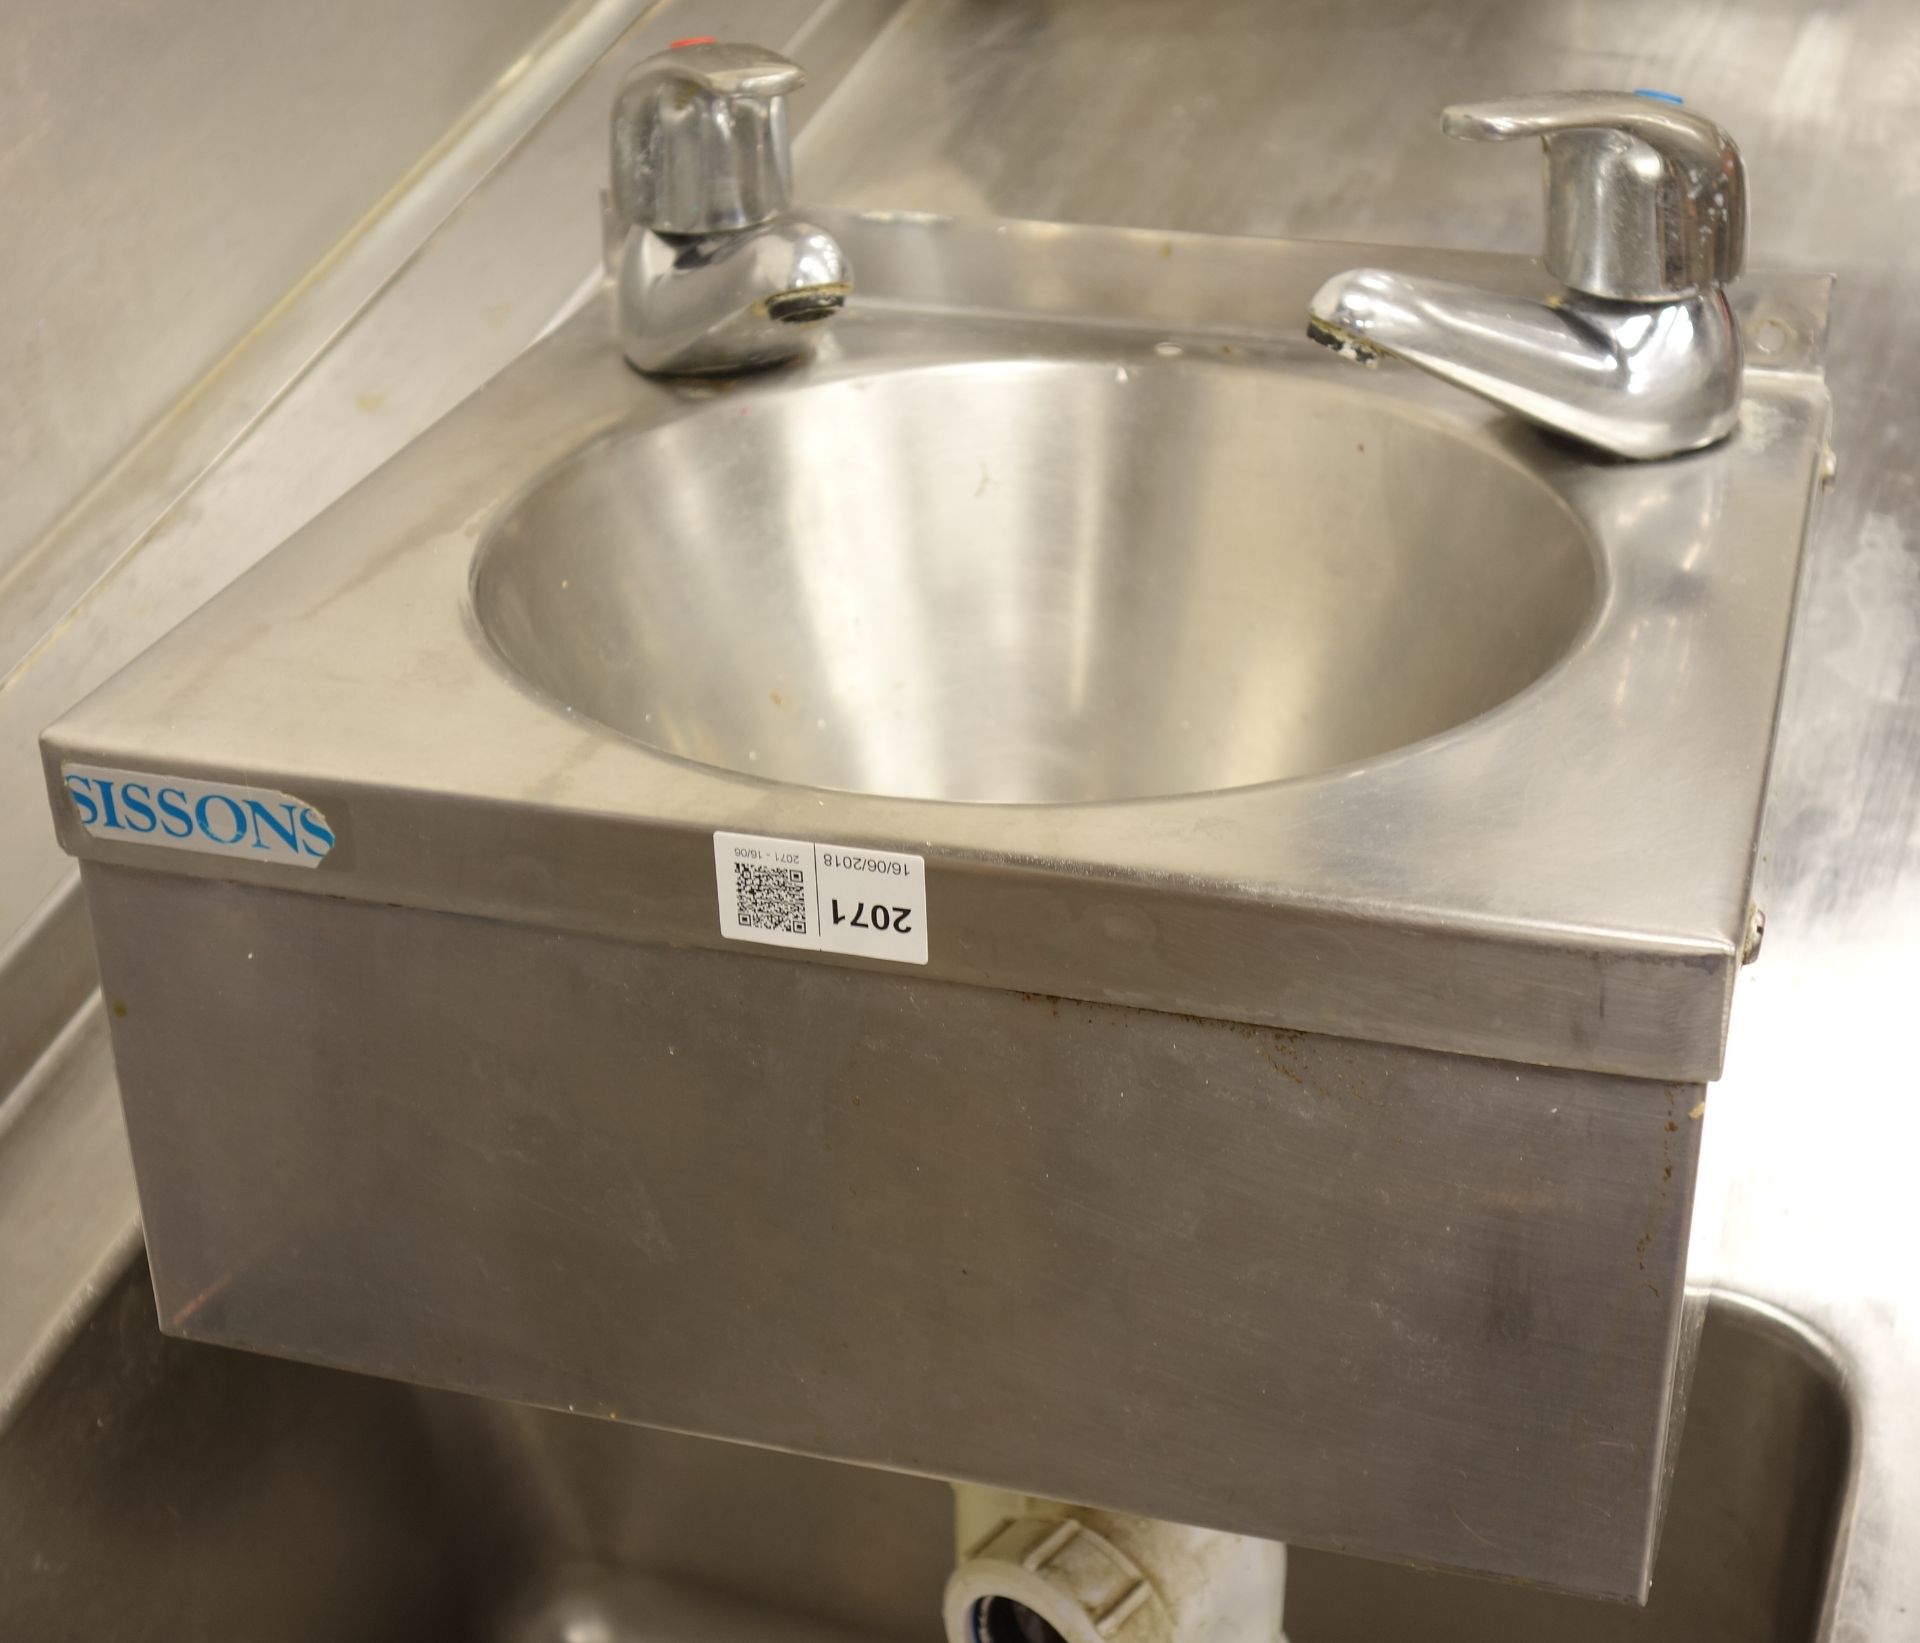 'Sissons' small commercial stainless steel hand washing sink,